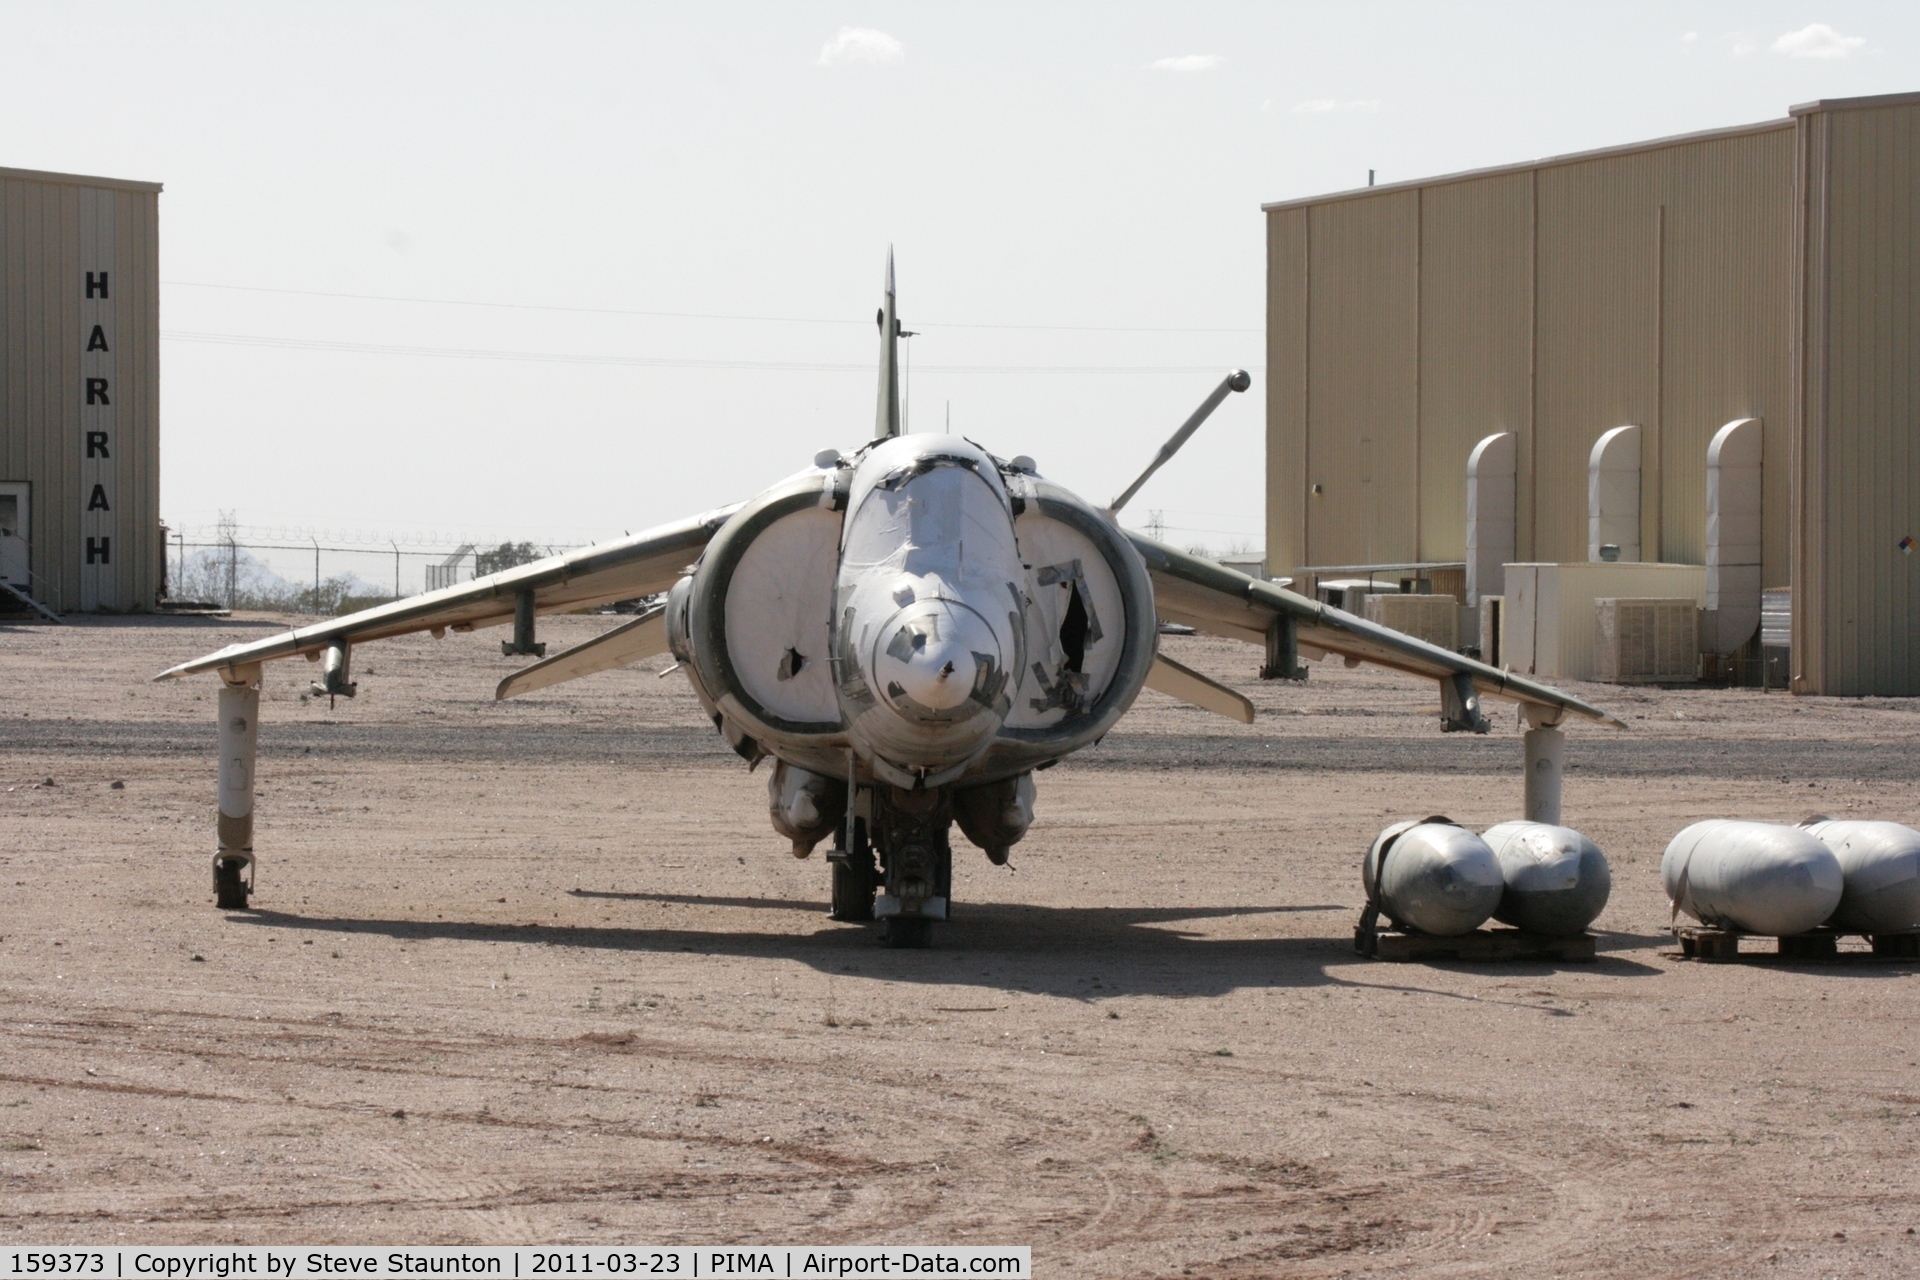 159373, Hawker Siddeley AV-8C Harrier C/N 712176, Taken at Pima Air and Space Museum, in March 2011 whilst on an Aeroprint Aviation tour